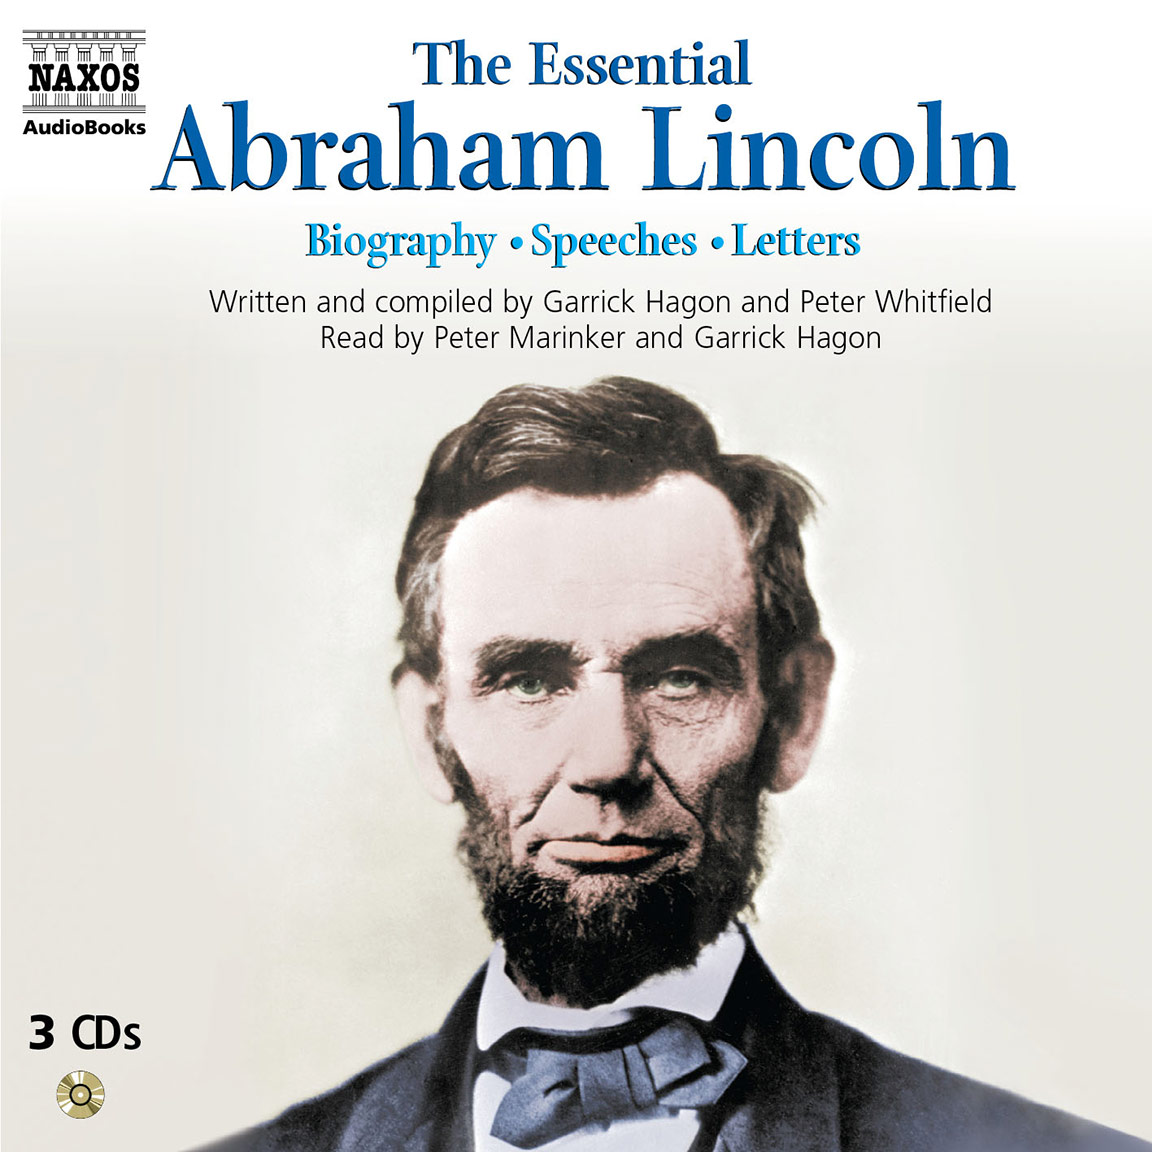 Abraham Lincoln (selections)